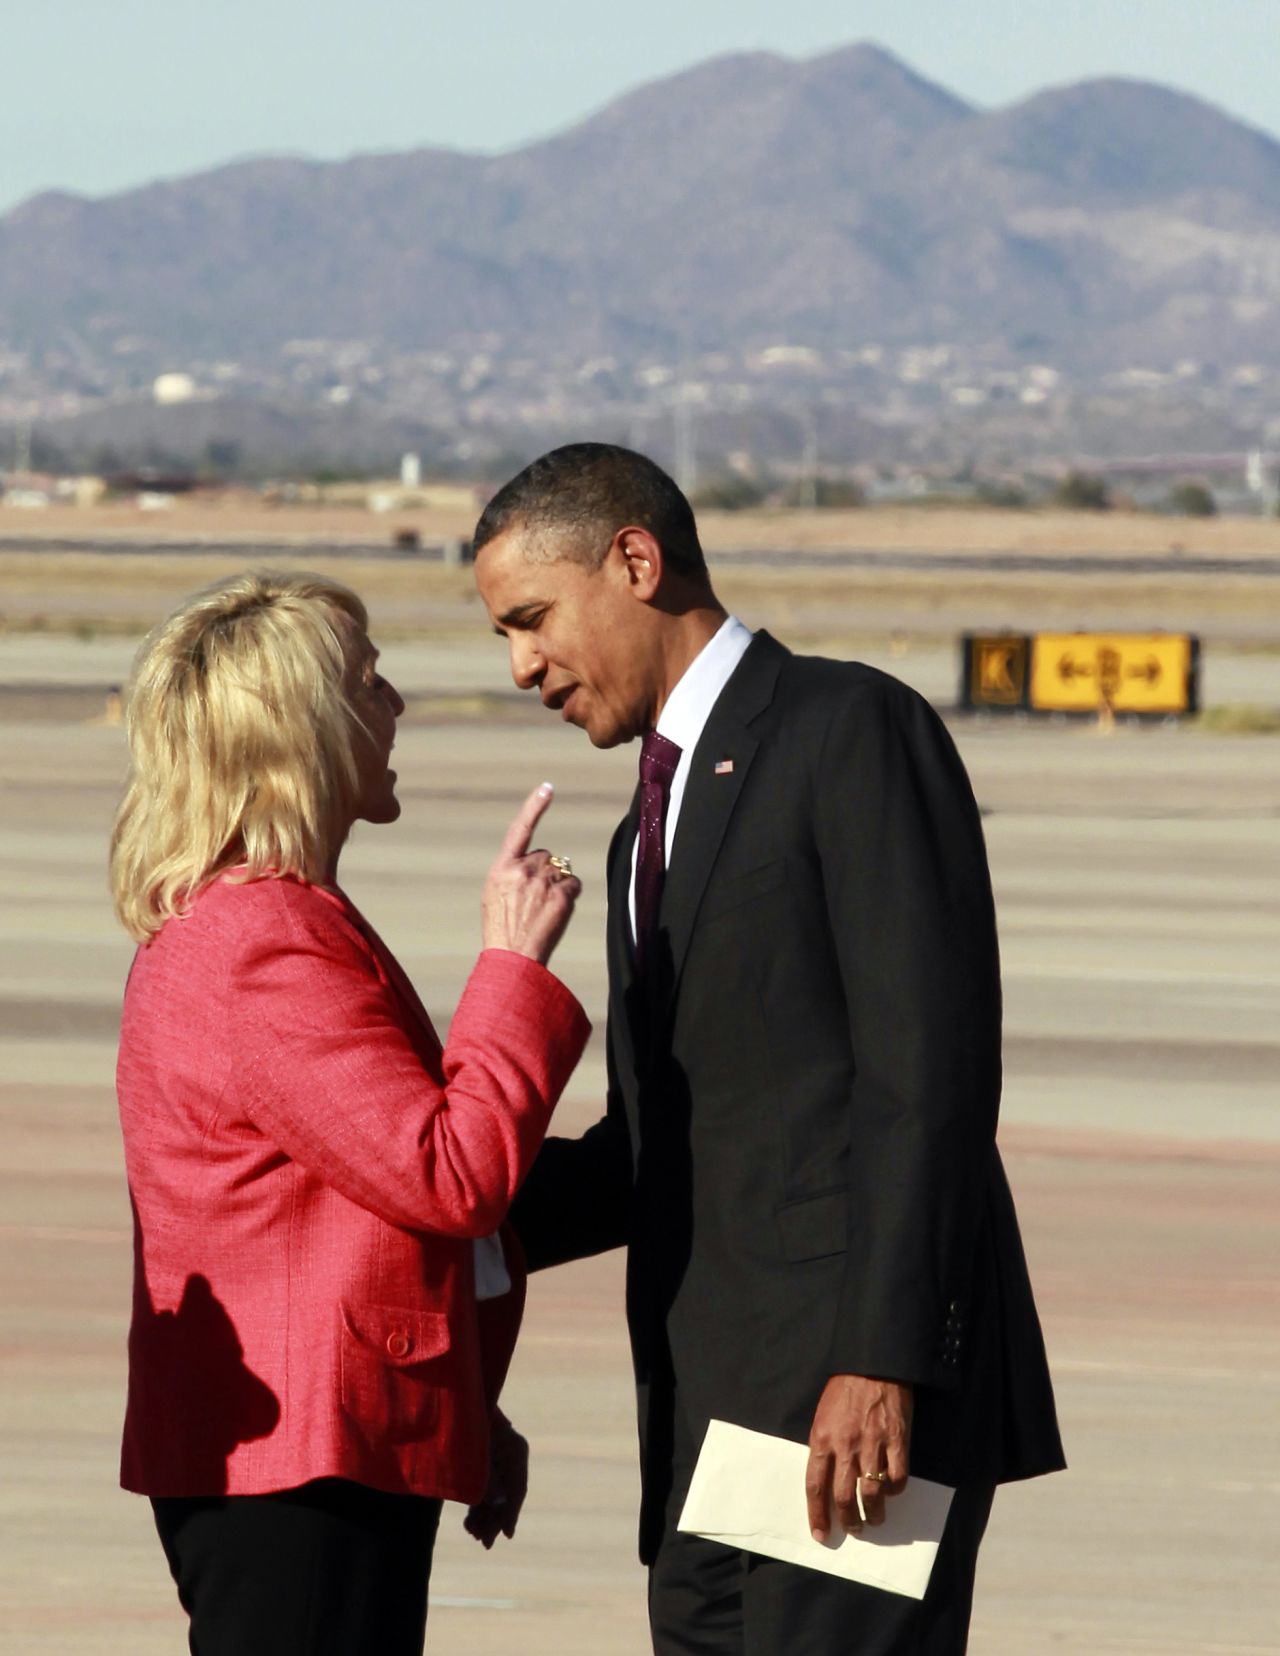 Then-Arizona Gov. Jan Brewer confronts President Obama in 2012 at a Phoenix airport -- one of several incidents that led to talk that he was being treated with less respect than his predecessors because of race. Brewer, a Republican, said Obama chided her for a book she had written; the president's defenders said her finger-wagging evoked the Jim Crow era, when whites addressed black men like they were boys.